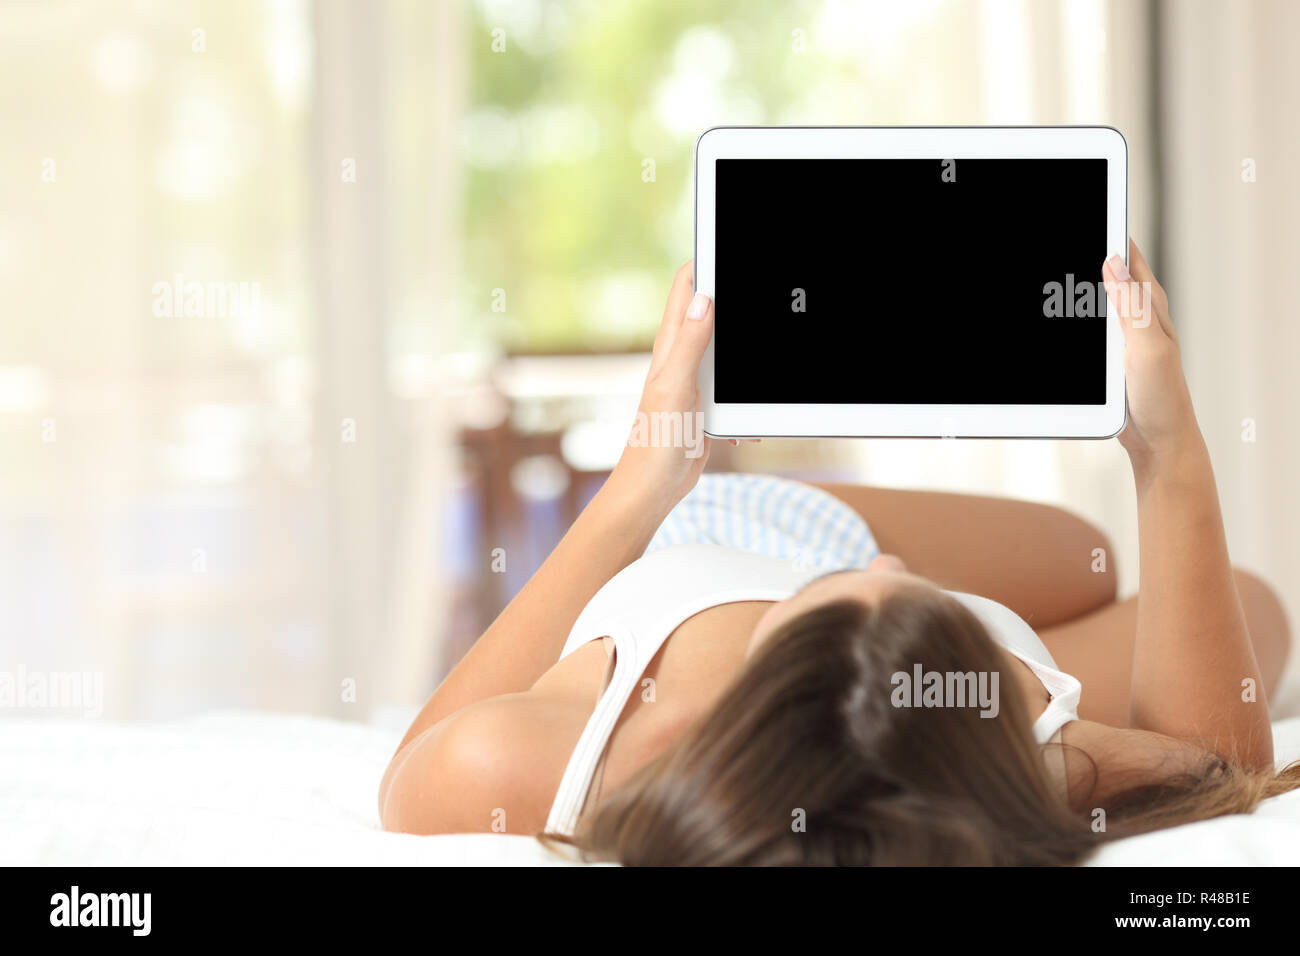 Girl on a bed showing a blank tablet screen Stock Photo